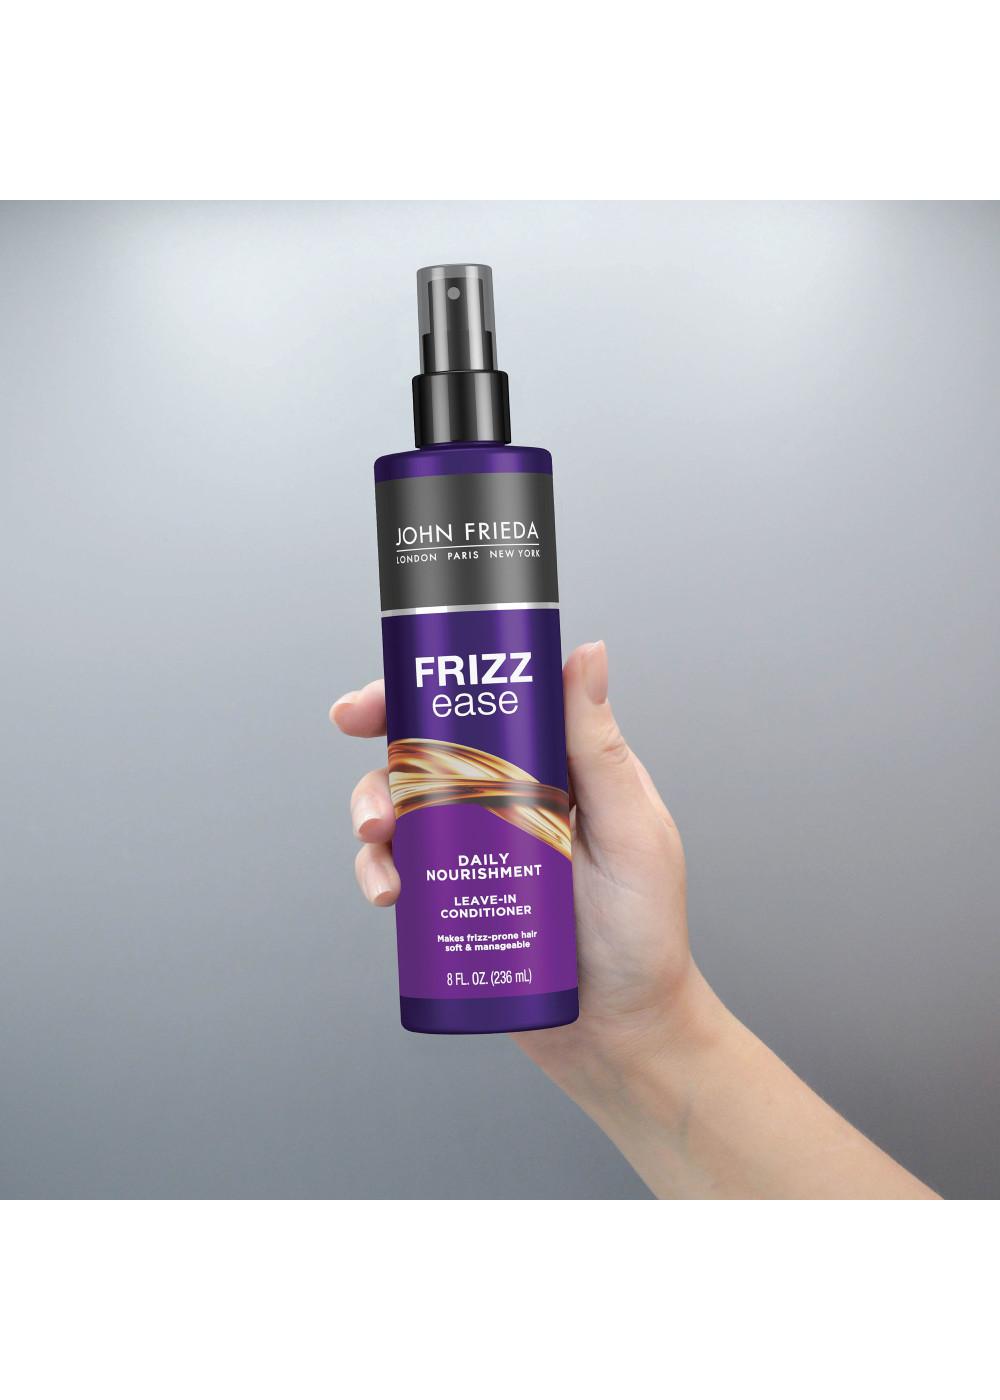 John Frieda Frizz Ease Daily Nourishment Leave-In Conditioner; image 3 of 9